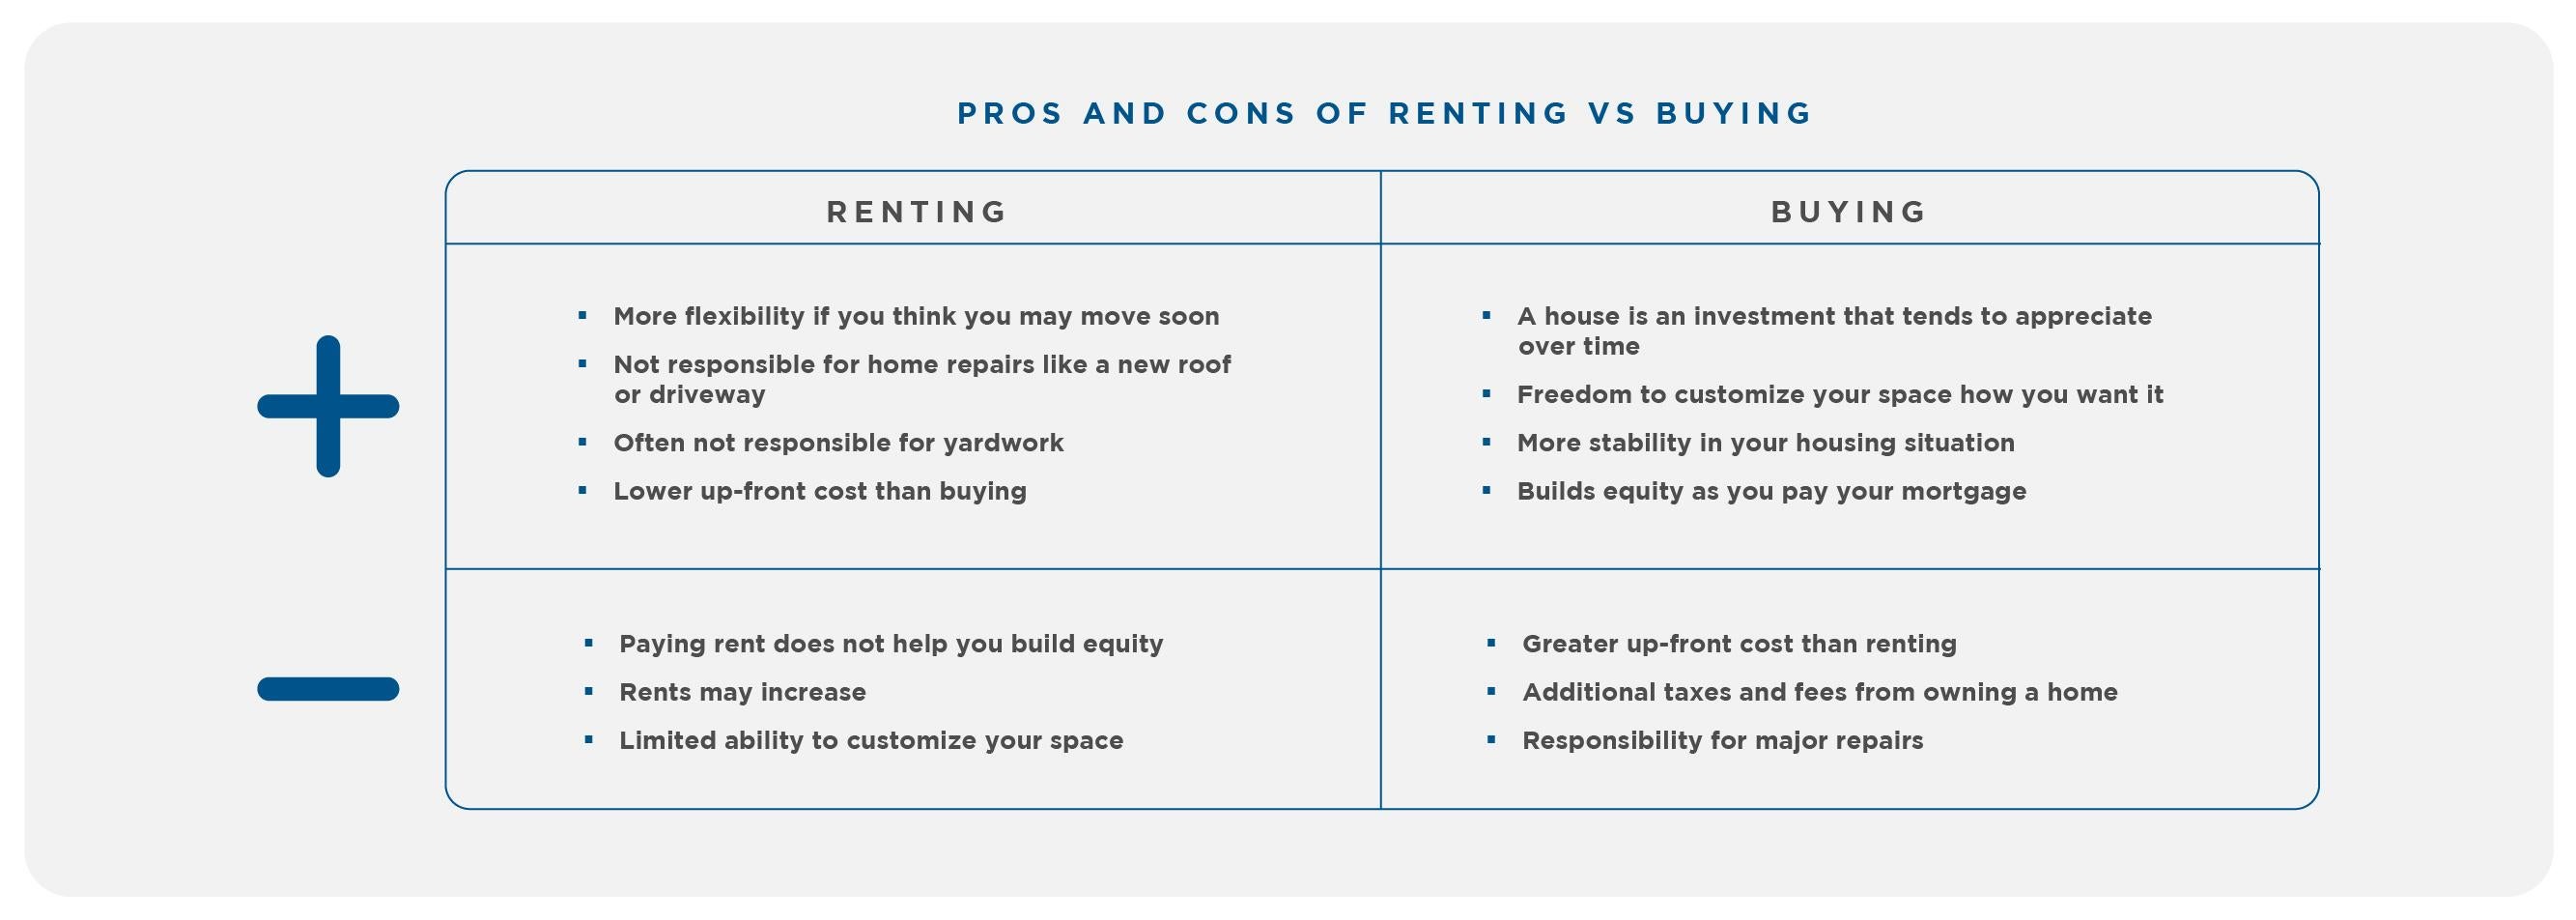 A table explaining the pros and cons of renting and buying.  Pros of renting include: You have more flexibility if you think you may move soon. You may not be responsible for home repairs like a new roof or driveway. You may not be responsible for yardwork, and renting has a lower up-front cost than buying. Cons of renting include: Paying rent does not help you build equity. Rents may increase. When you rent, you have a limited ability to customize your space. Pros of buying include: A house is an investment that tends to appreciate over time. When you buy a home, you have freedom to customize your space how you want it. Buying offers more stability in your housing situation. Buying also helps you build equity as you pay your mortgage. Cons of buying include: Buying usually has greater up-front cost than renting. You may incur additional taxes and fees from owning a home. You will have responsibility for major repairs.